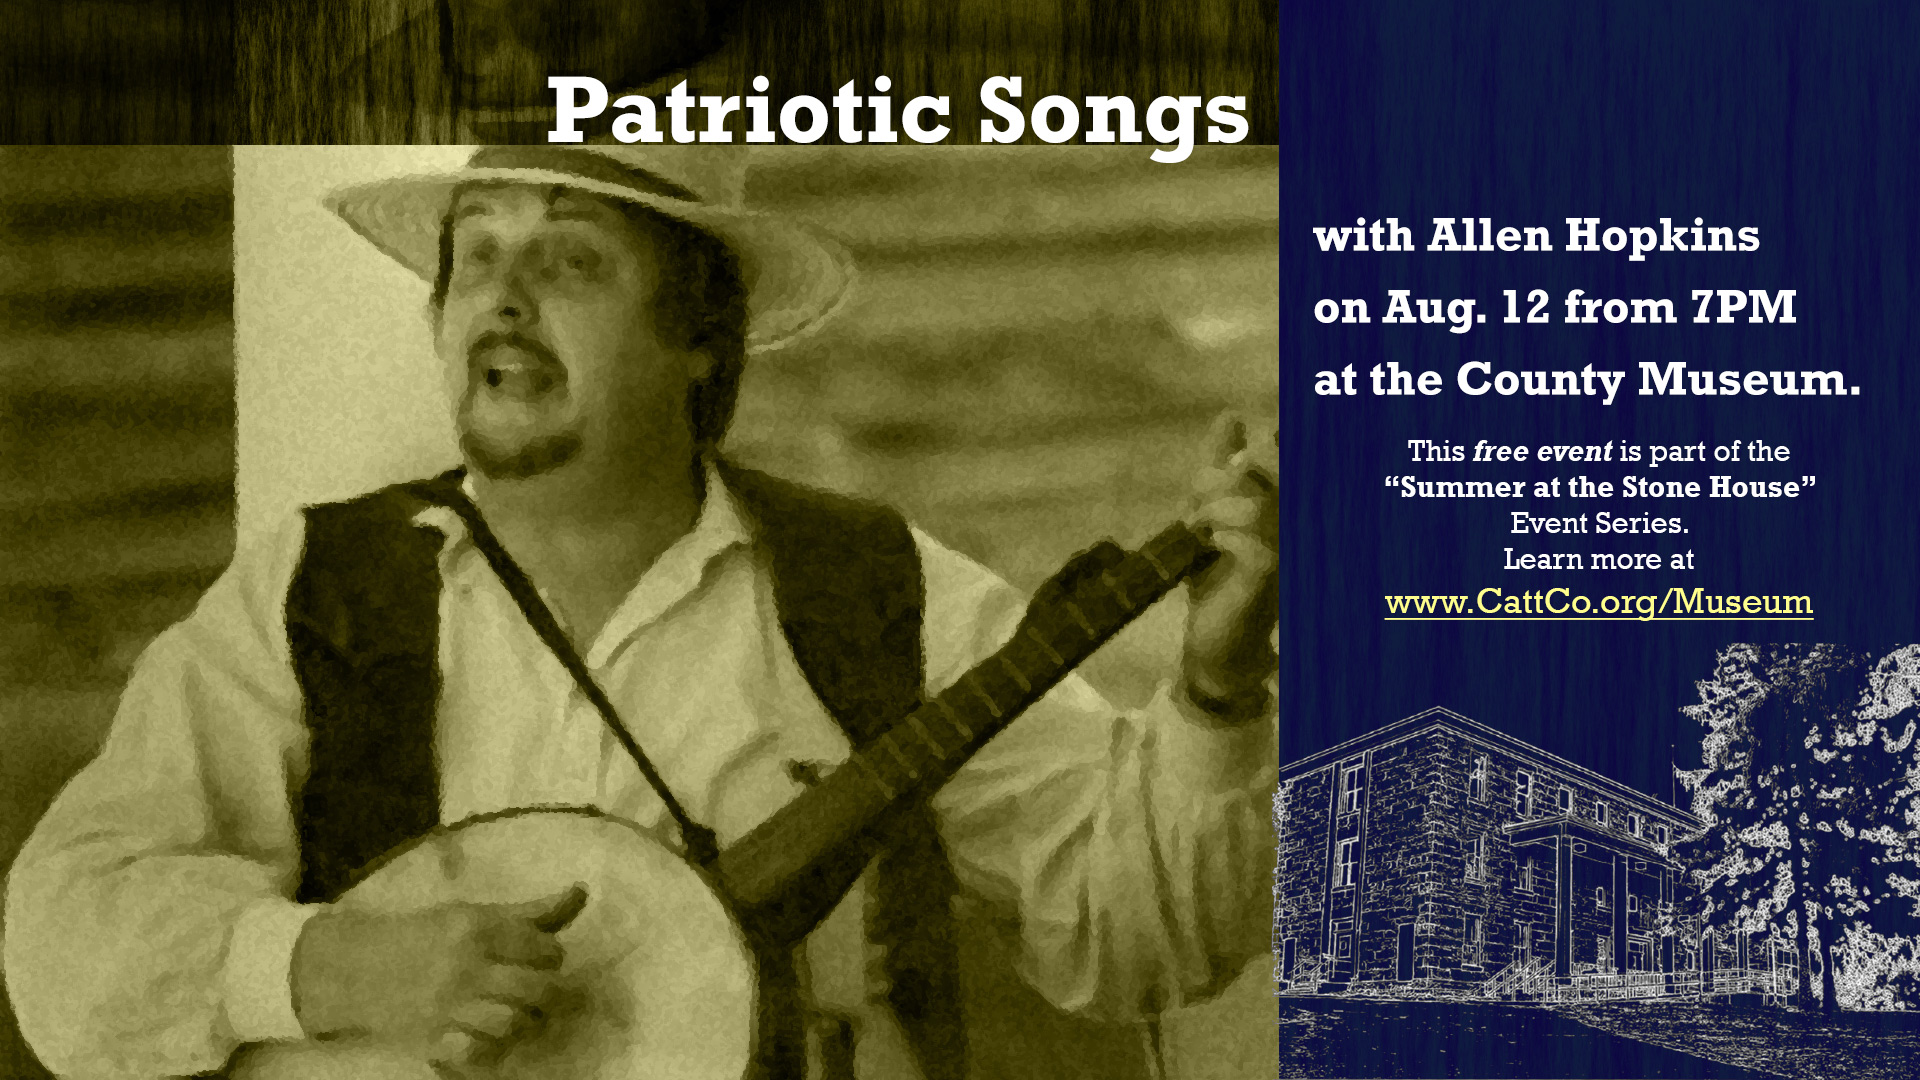 Patriotic Songs with Allen Hopkins on Aug. 12 from 7PM at the County Museum.